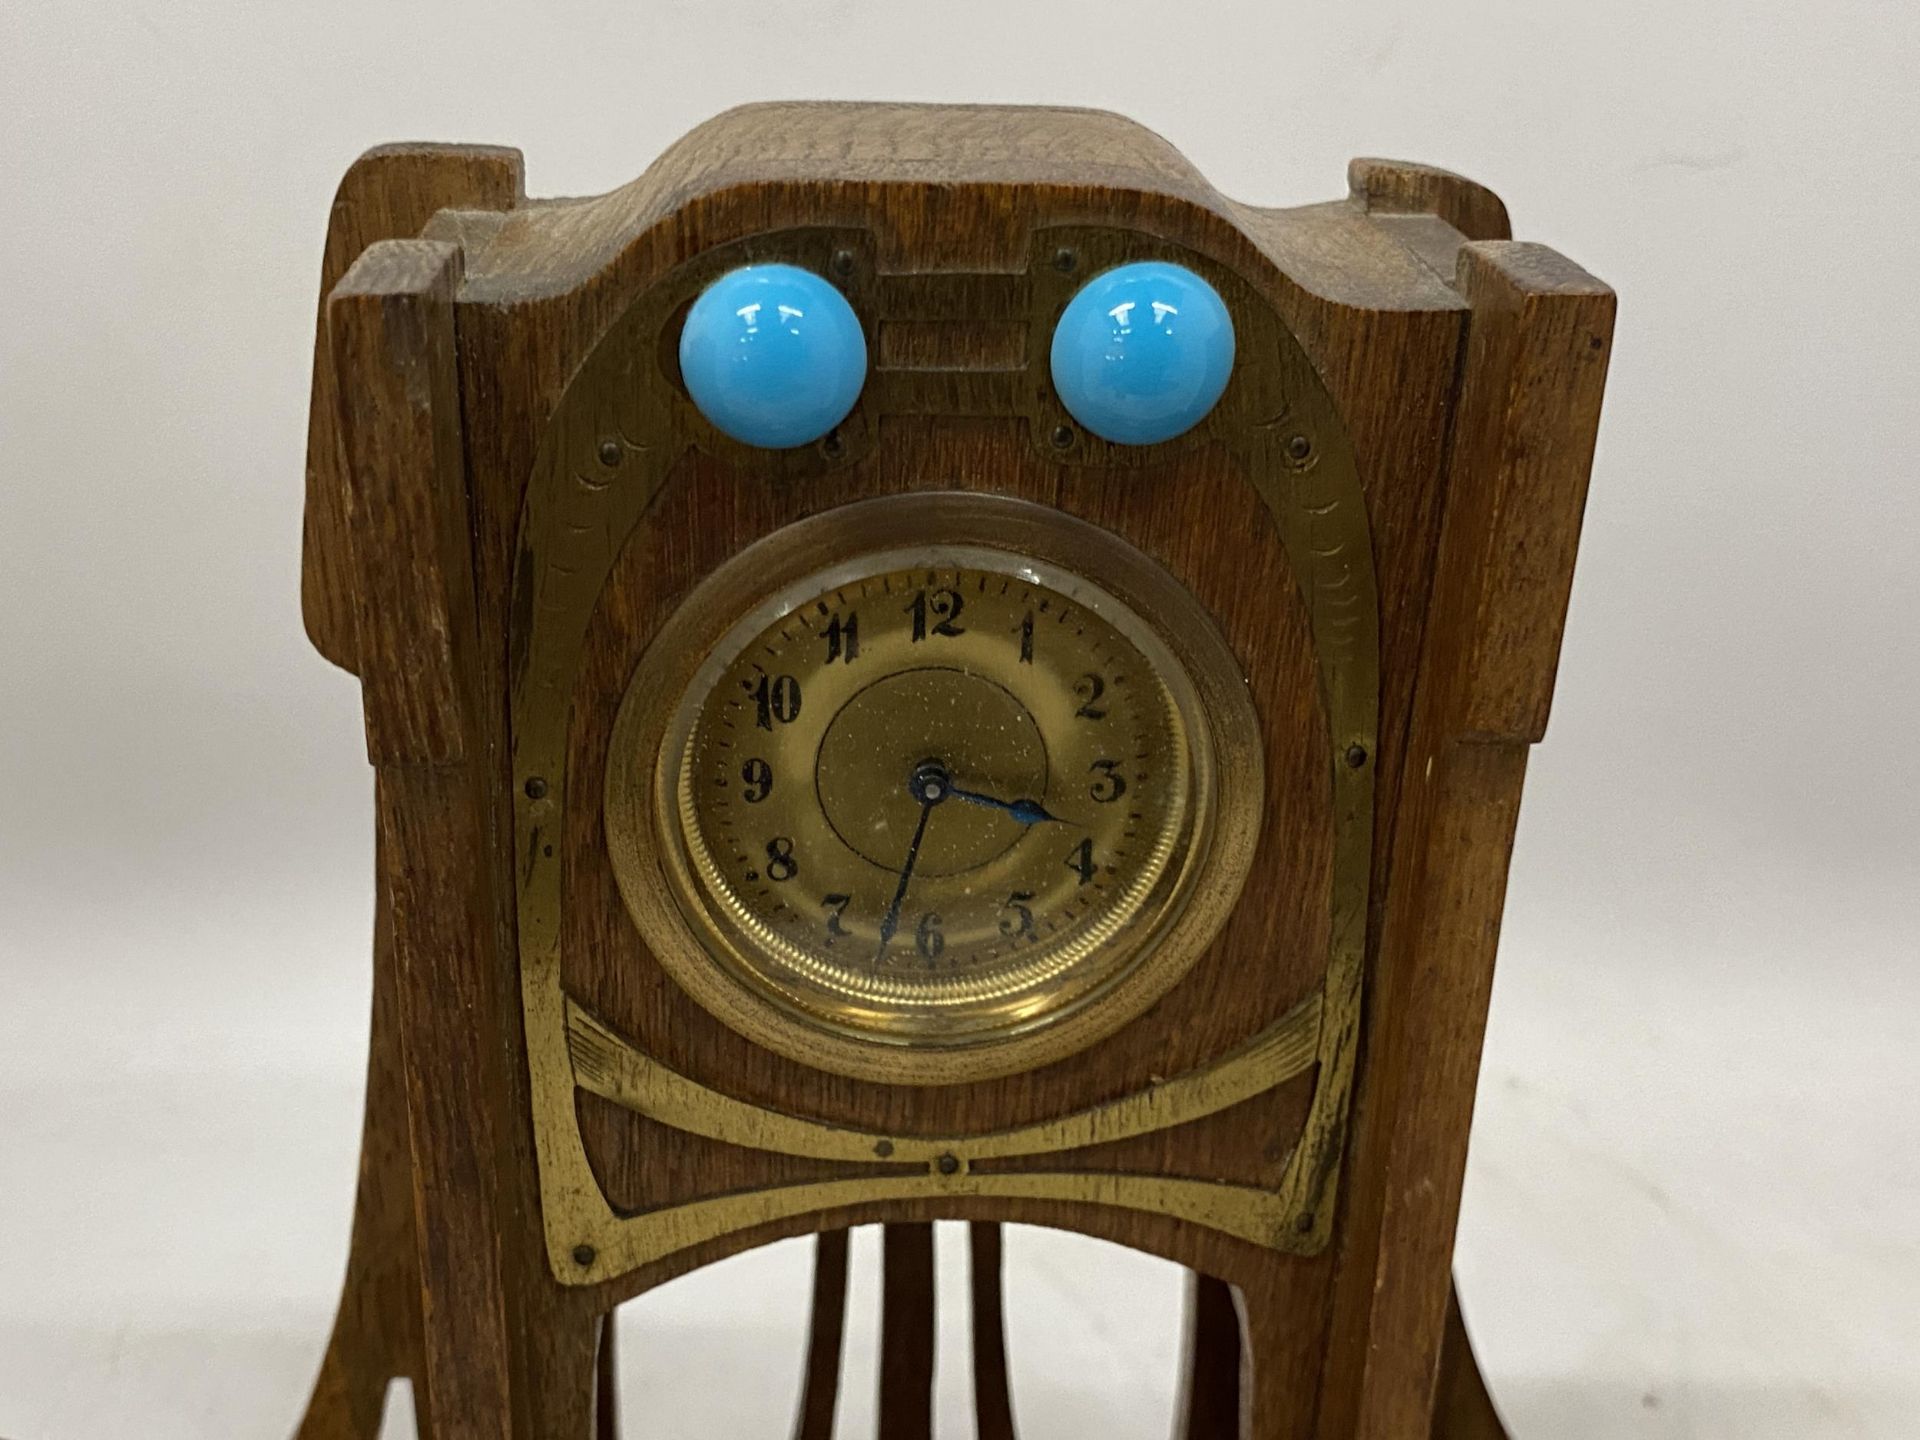 AN ARTS AND CRAFTS WOODEN CLOCK WITH INSET INKWELLS - Image 2 of 3